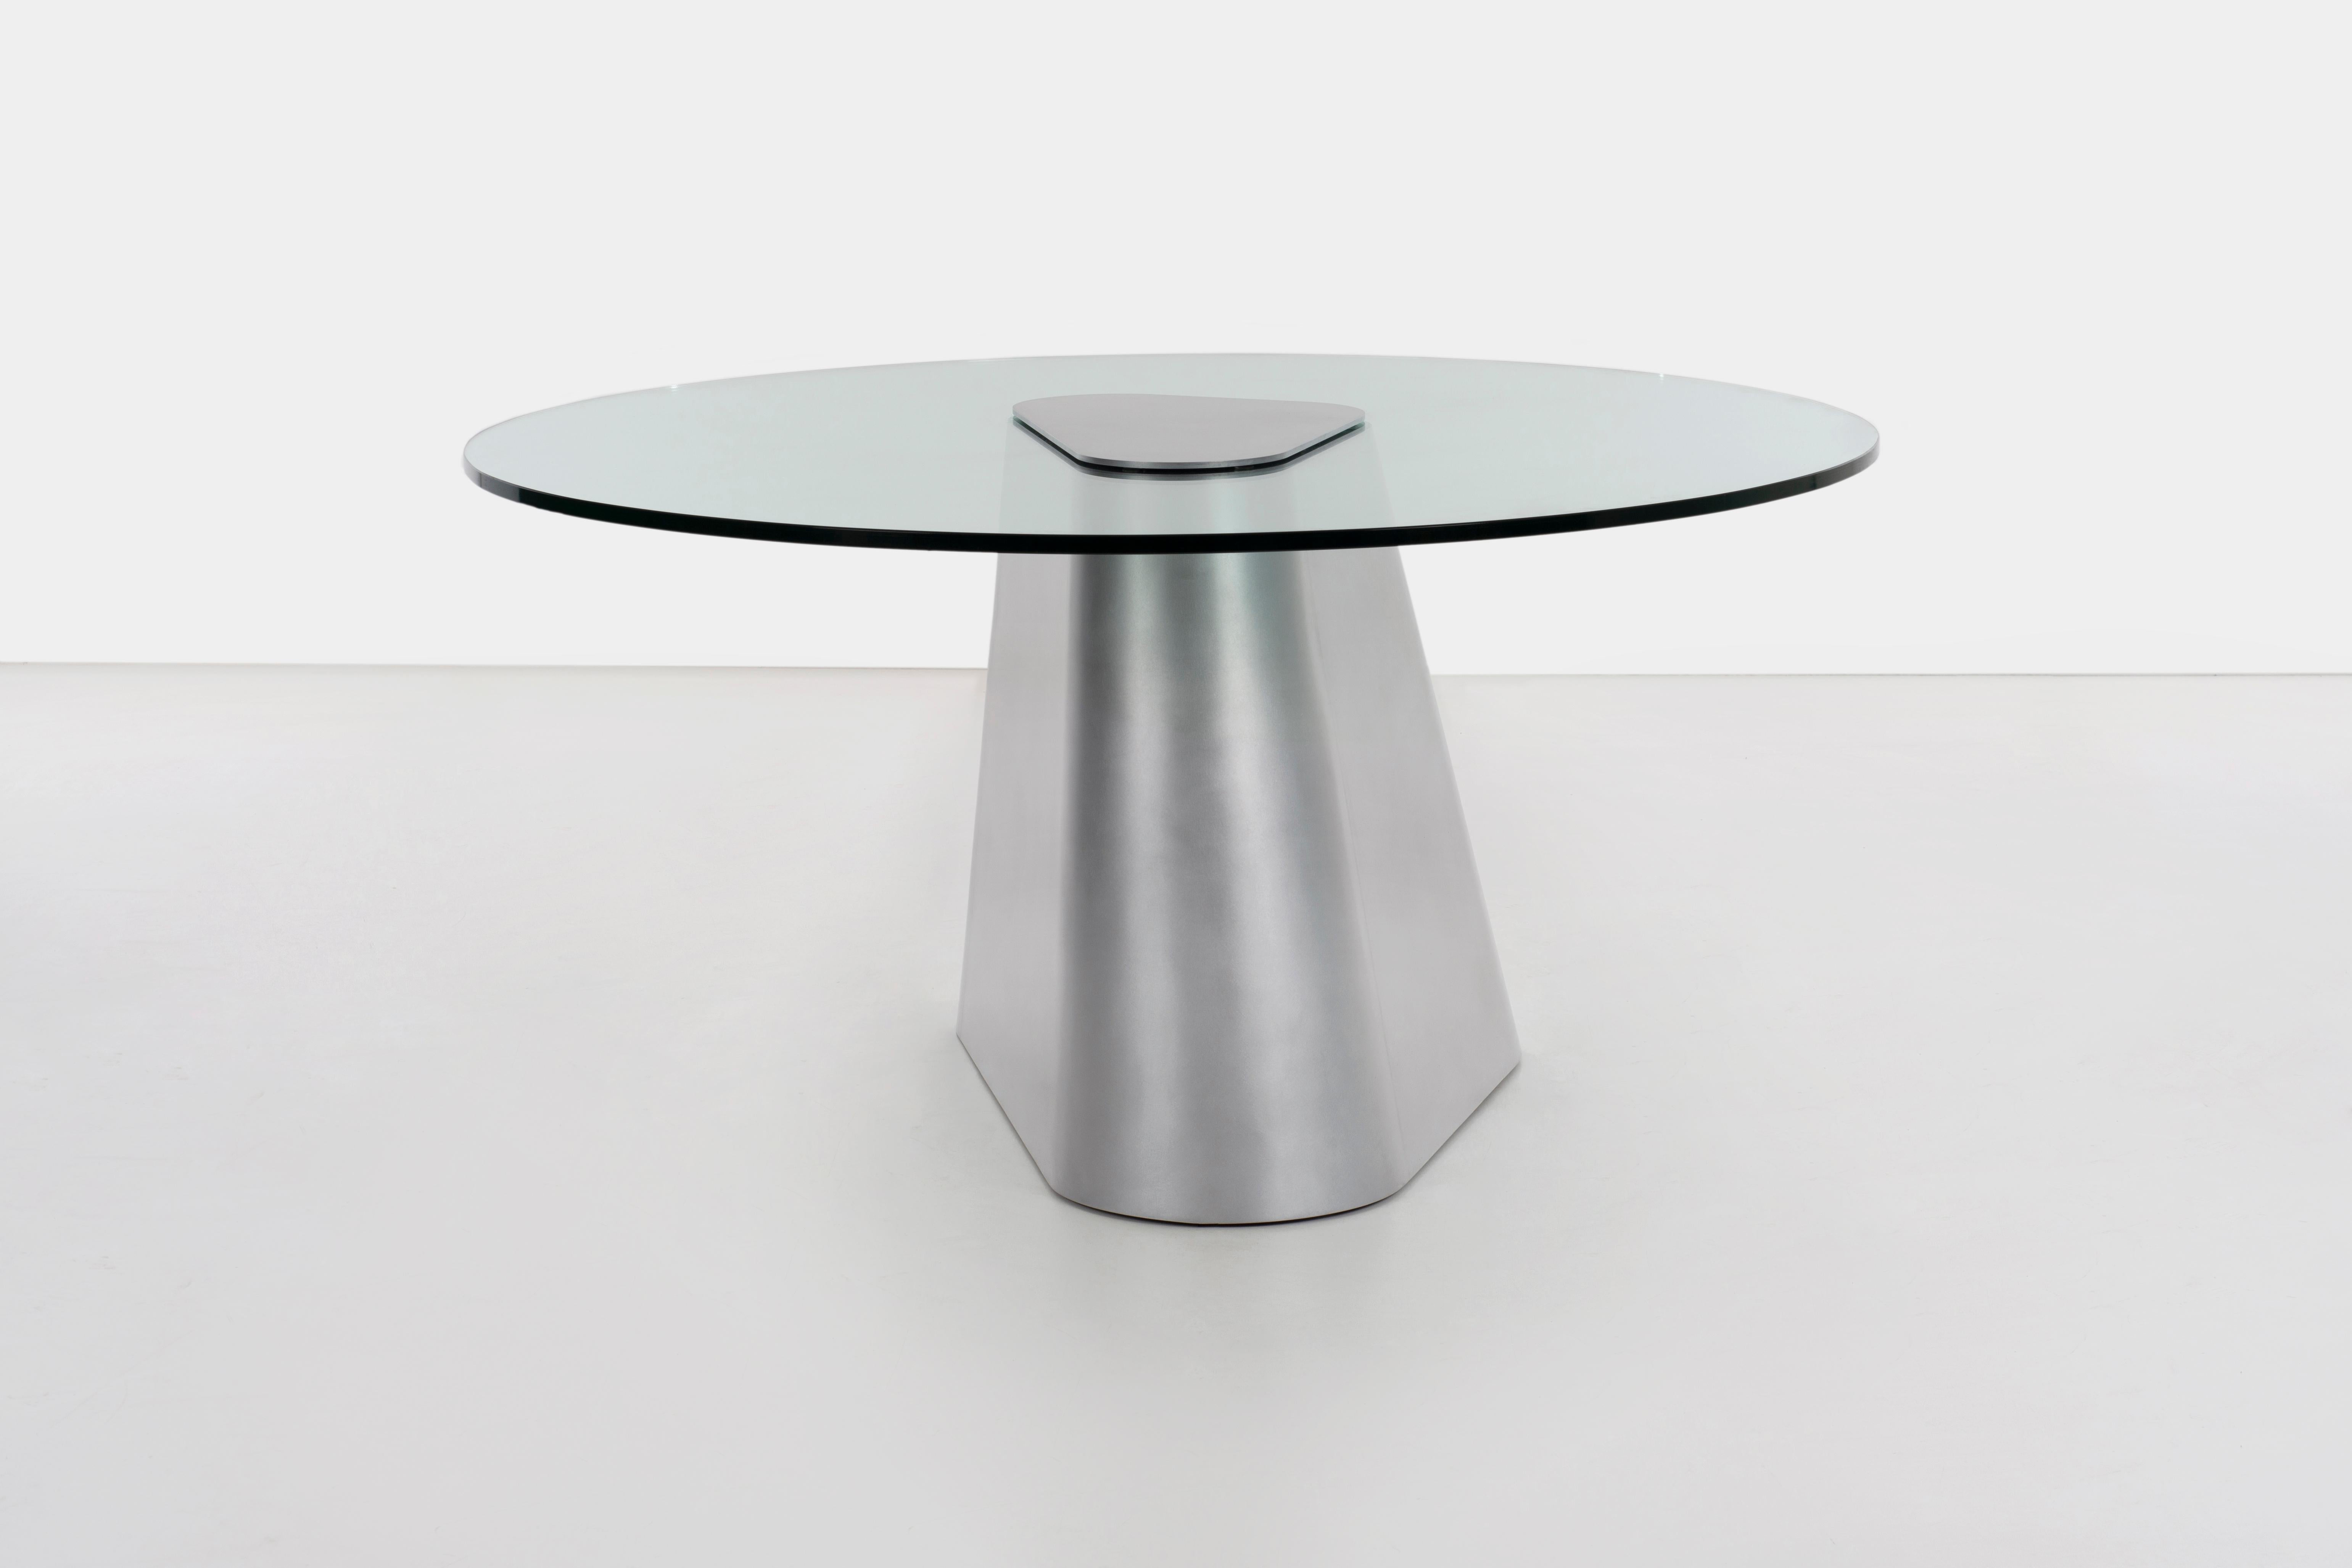 Sculptural TM table in wax-polished aluminum with .75 inch thick glass top. The form is composed of two Nesci-Triangle forms that loft together to form the base of this glass-topped dining table. The glass top has a free-standing centerpiece made of